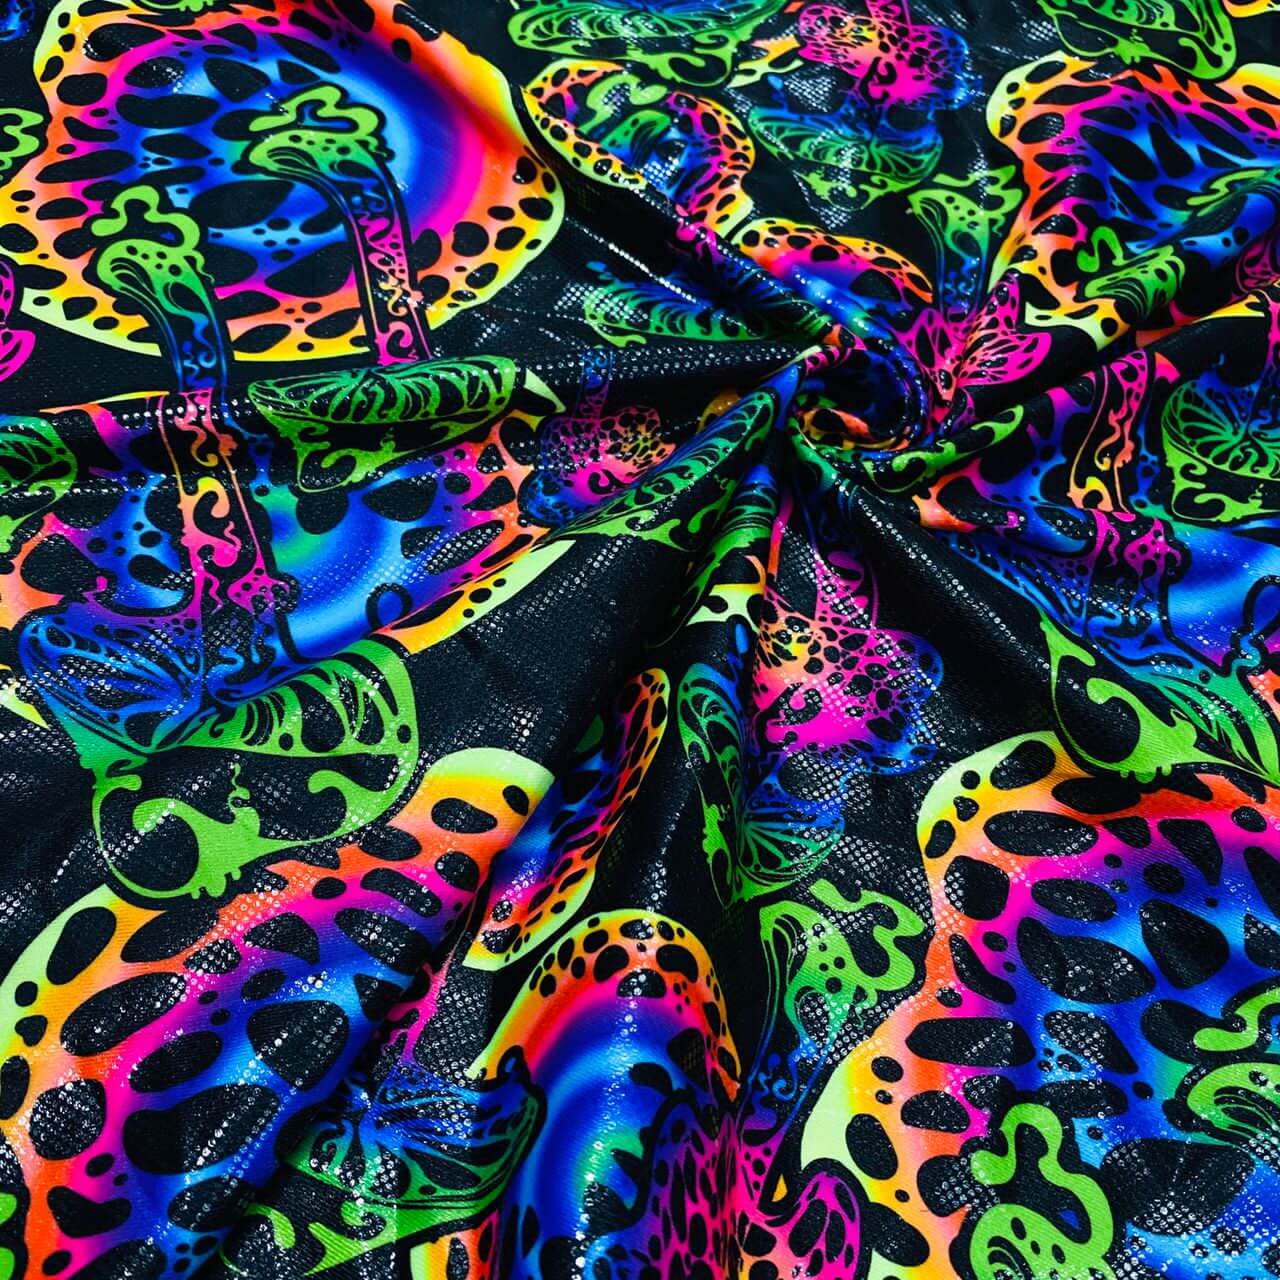 No-Stretch Psychedelic Mushrooms Neon Hologram Foil Print Polyester Spandex  Fabric By Yard for Dress (243-8) Spandex Fabric